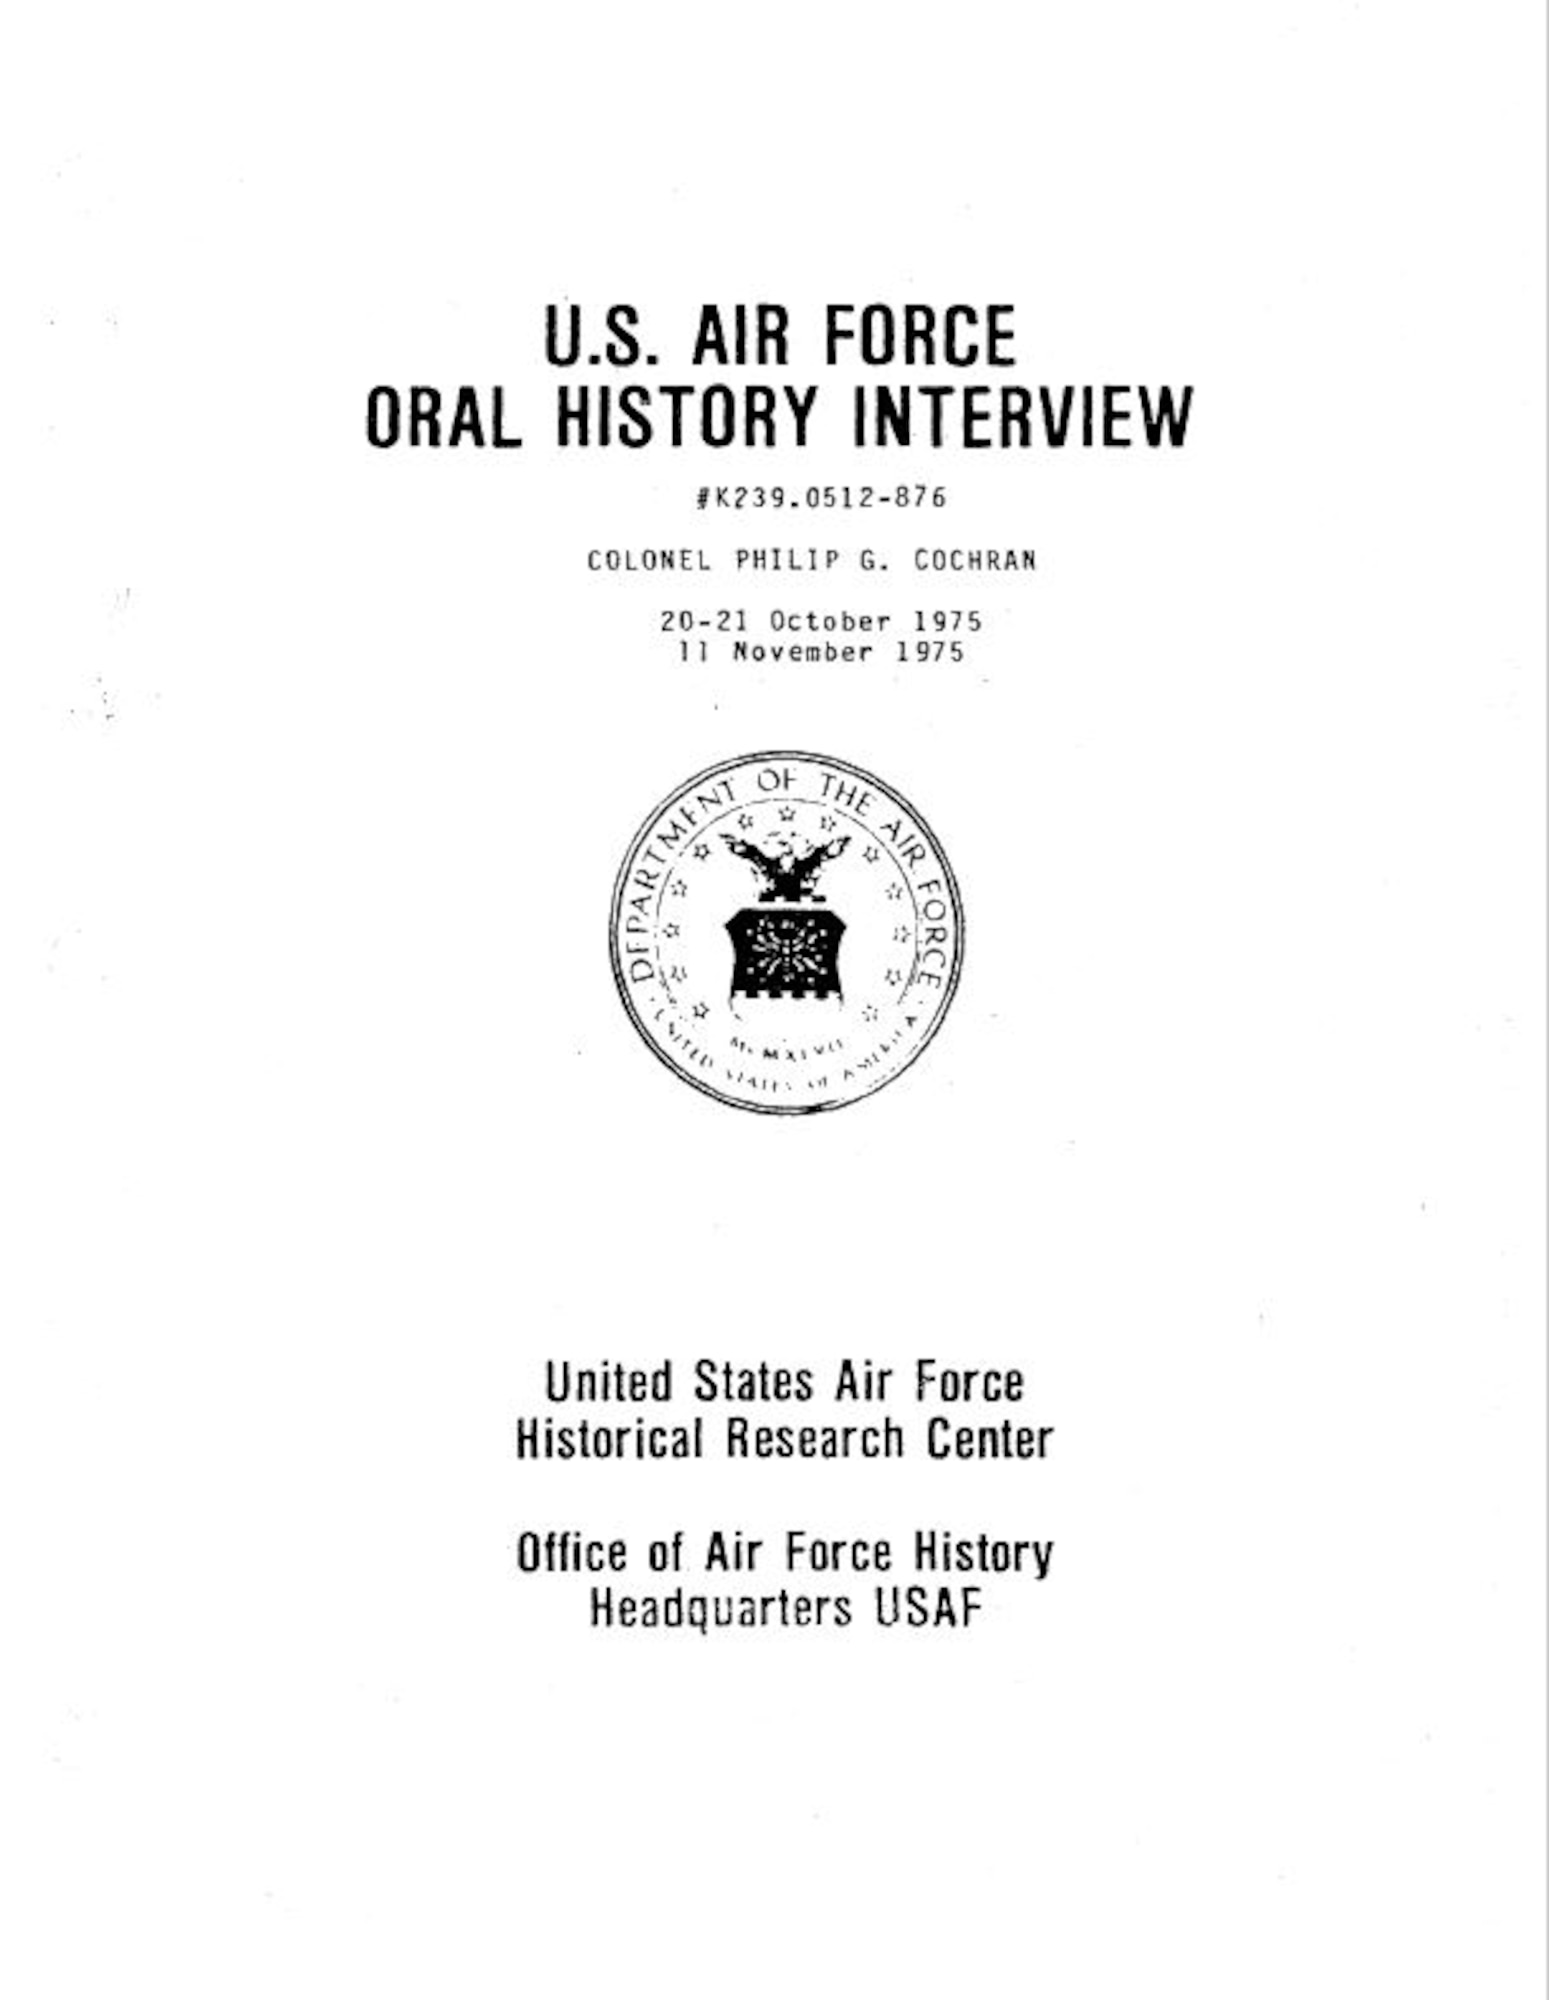 Cover of the 400-plus page formal transcript of Col. Philip Cochran's interview.